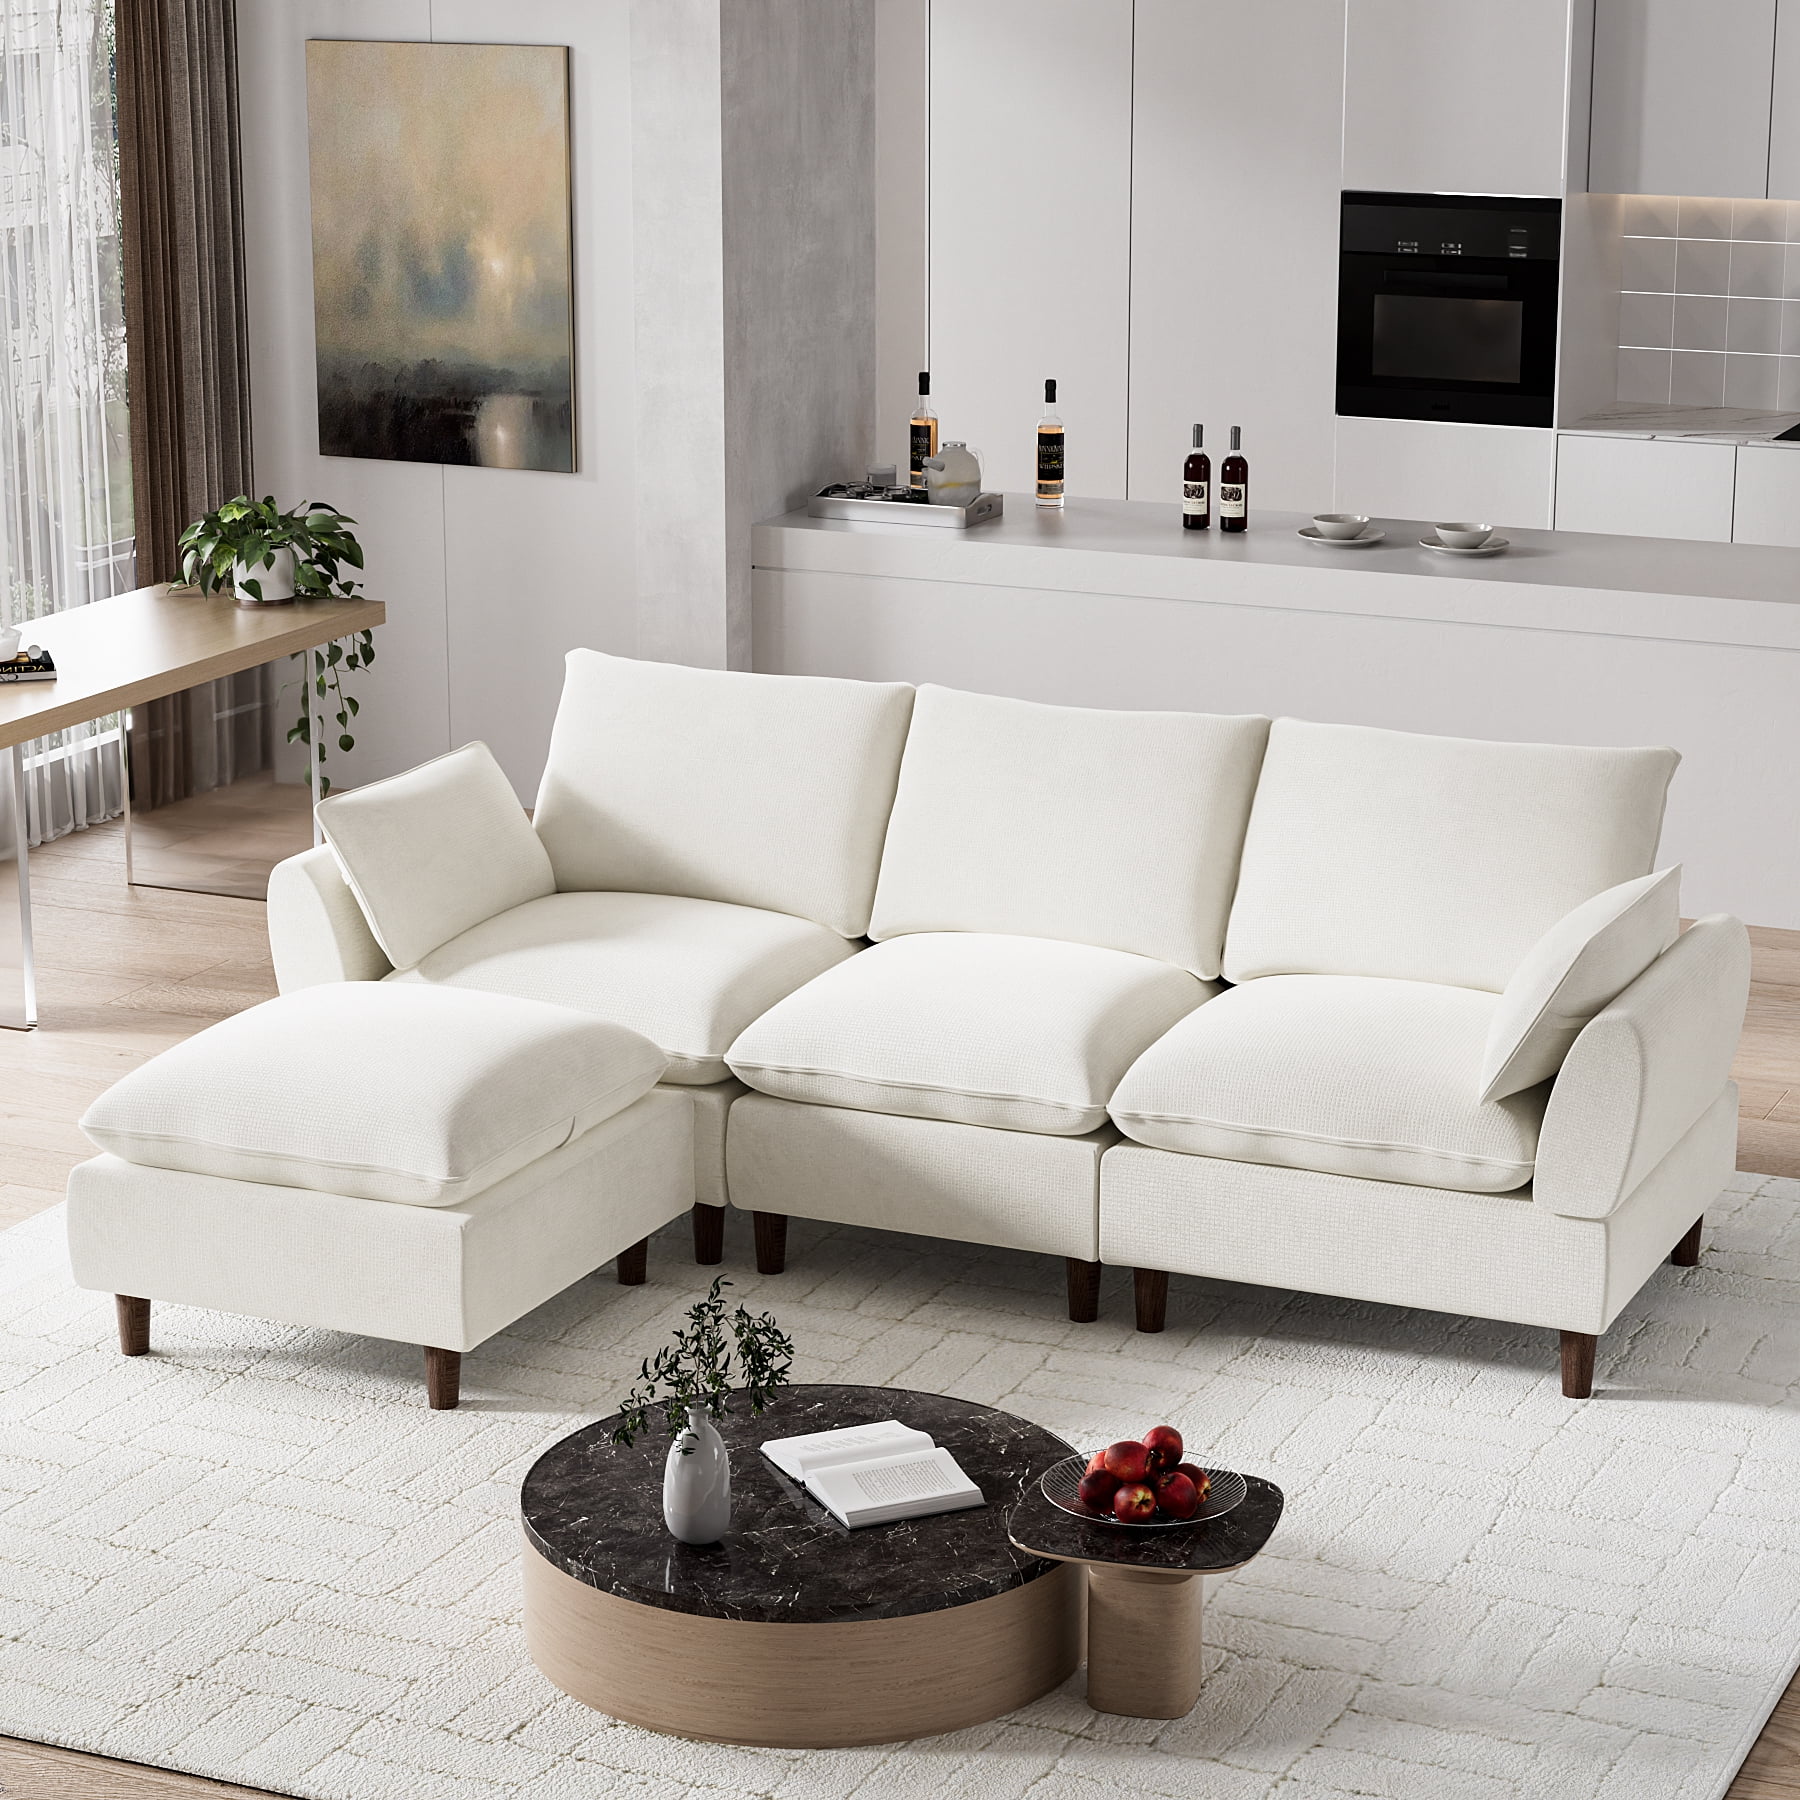 Rophefx Chenille Sectional Couches, 94.5 Inch Modular Sectional Sofa ...